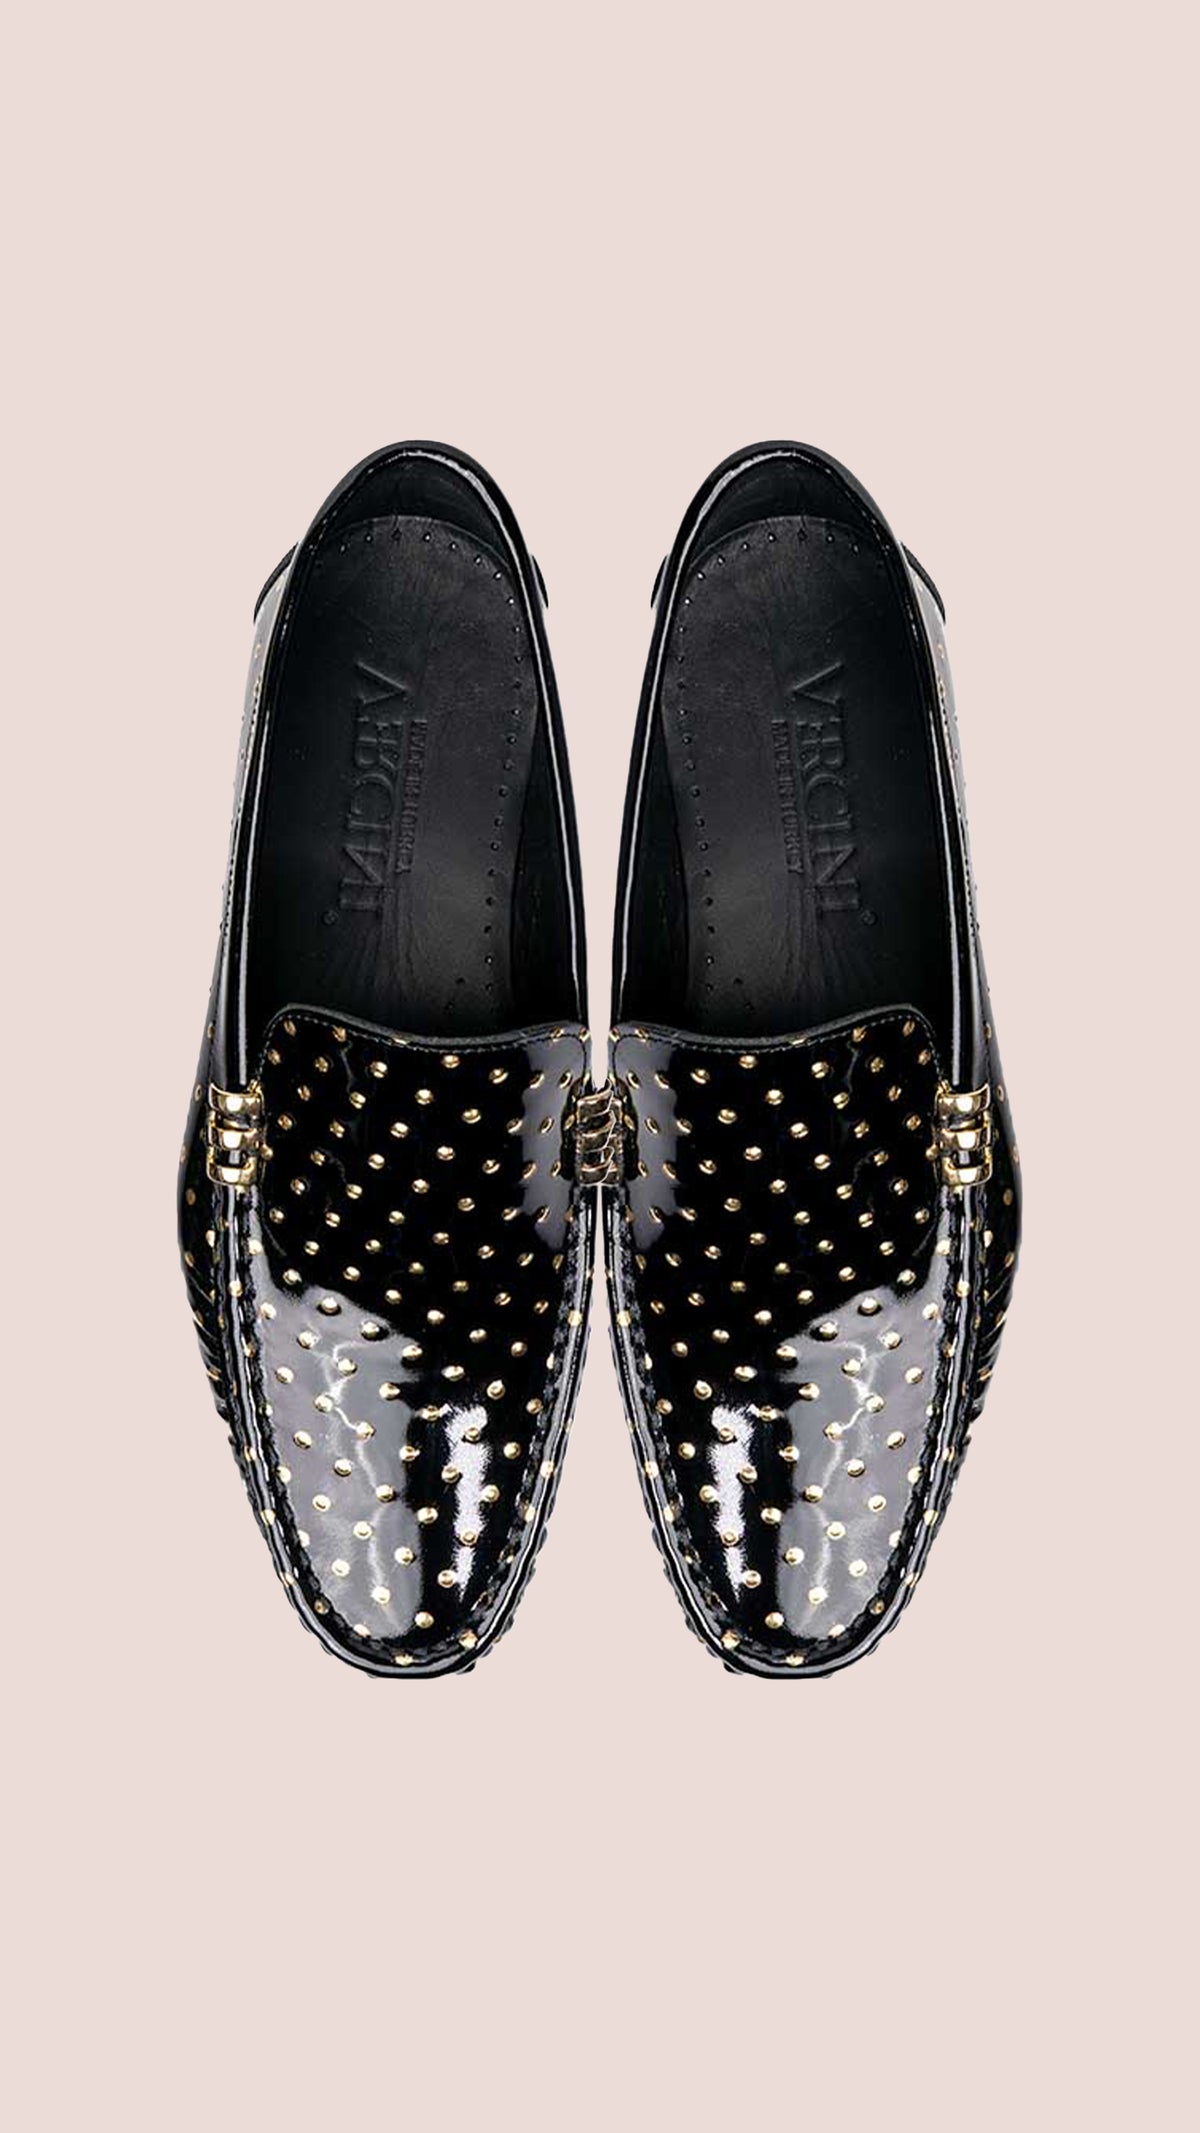 BLK/GOLD SHOES SHOES Ph inventory shoes Vercini